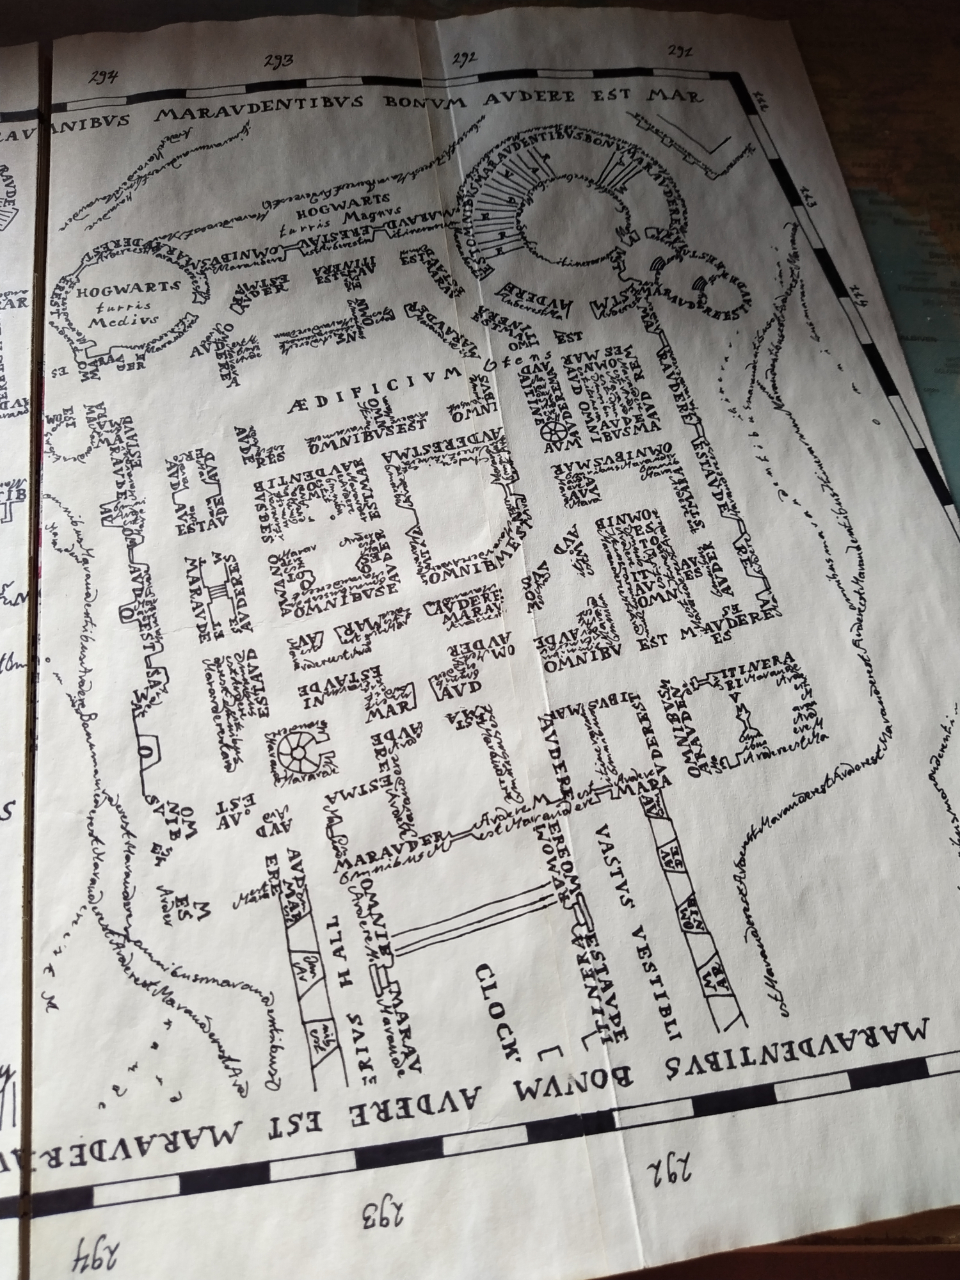 Handmade and Fan-Made: The Marauder's Map Brought to Life from Scratch